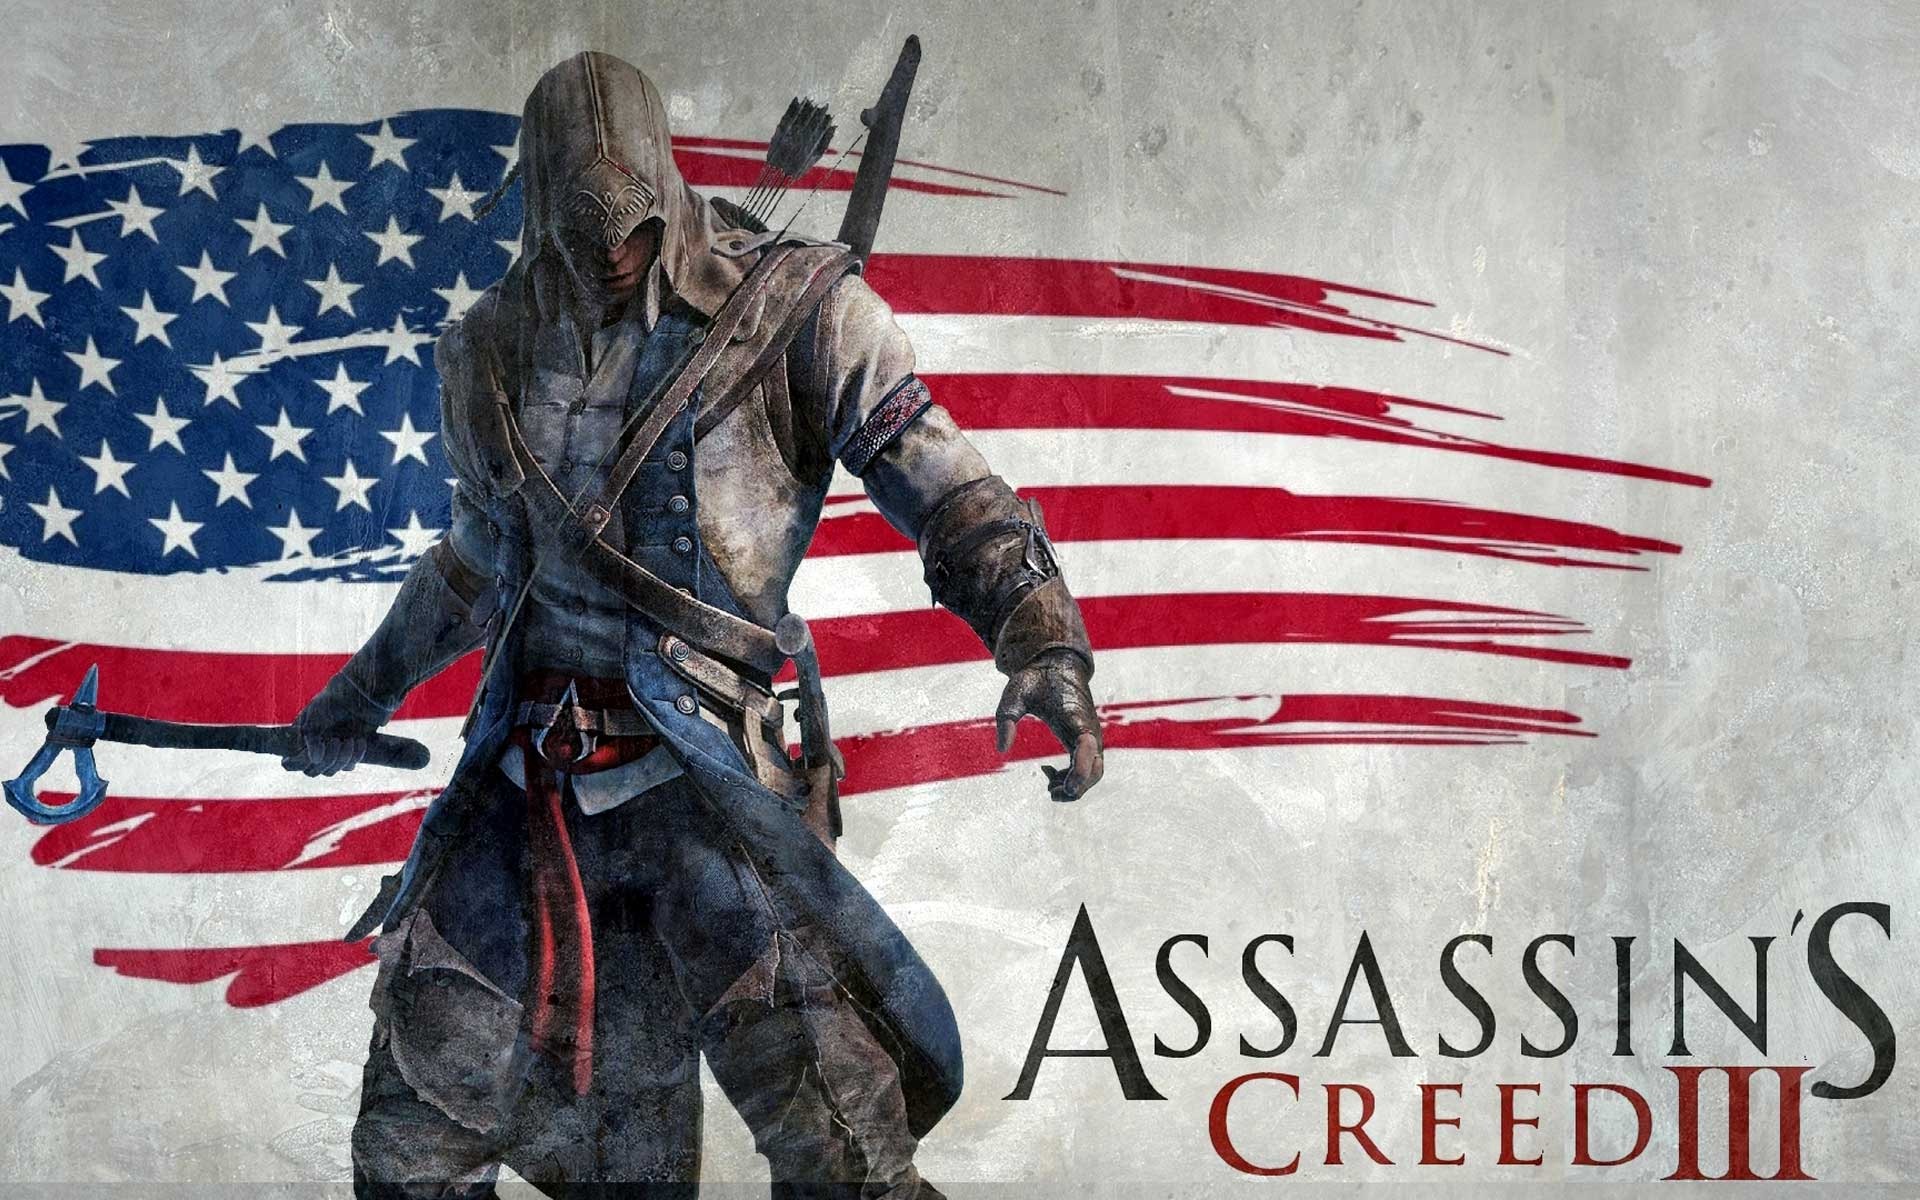 Assassin's Creed 3 HD wallpapers #12 - 1920x1200